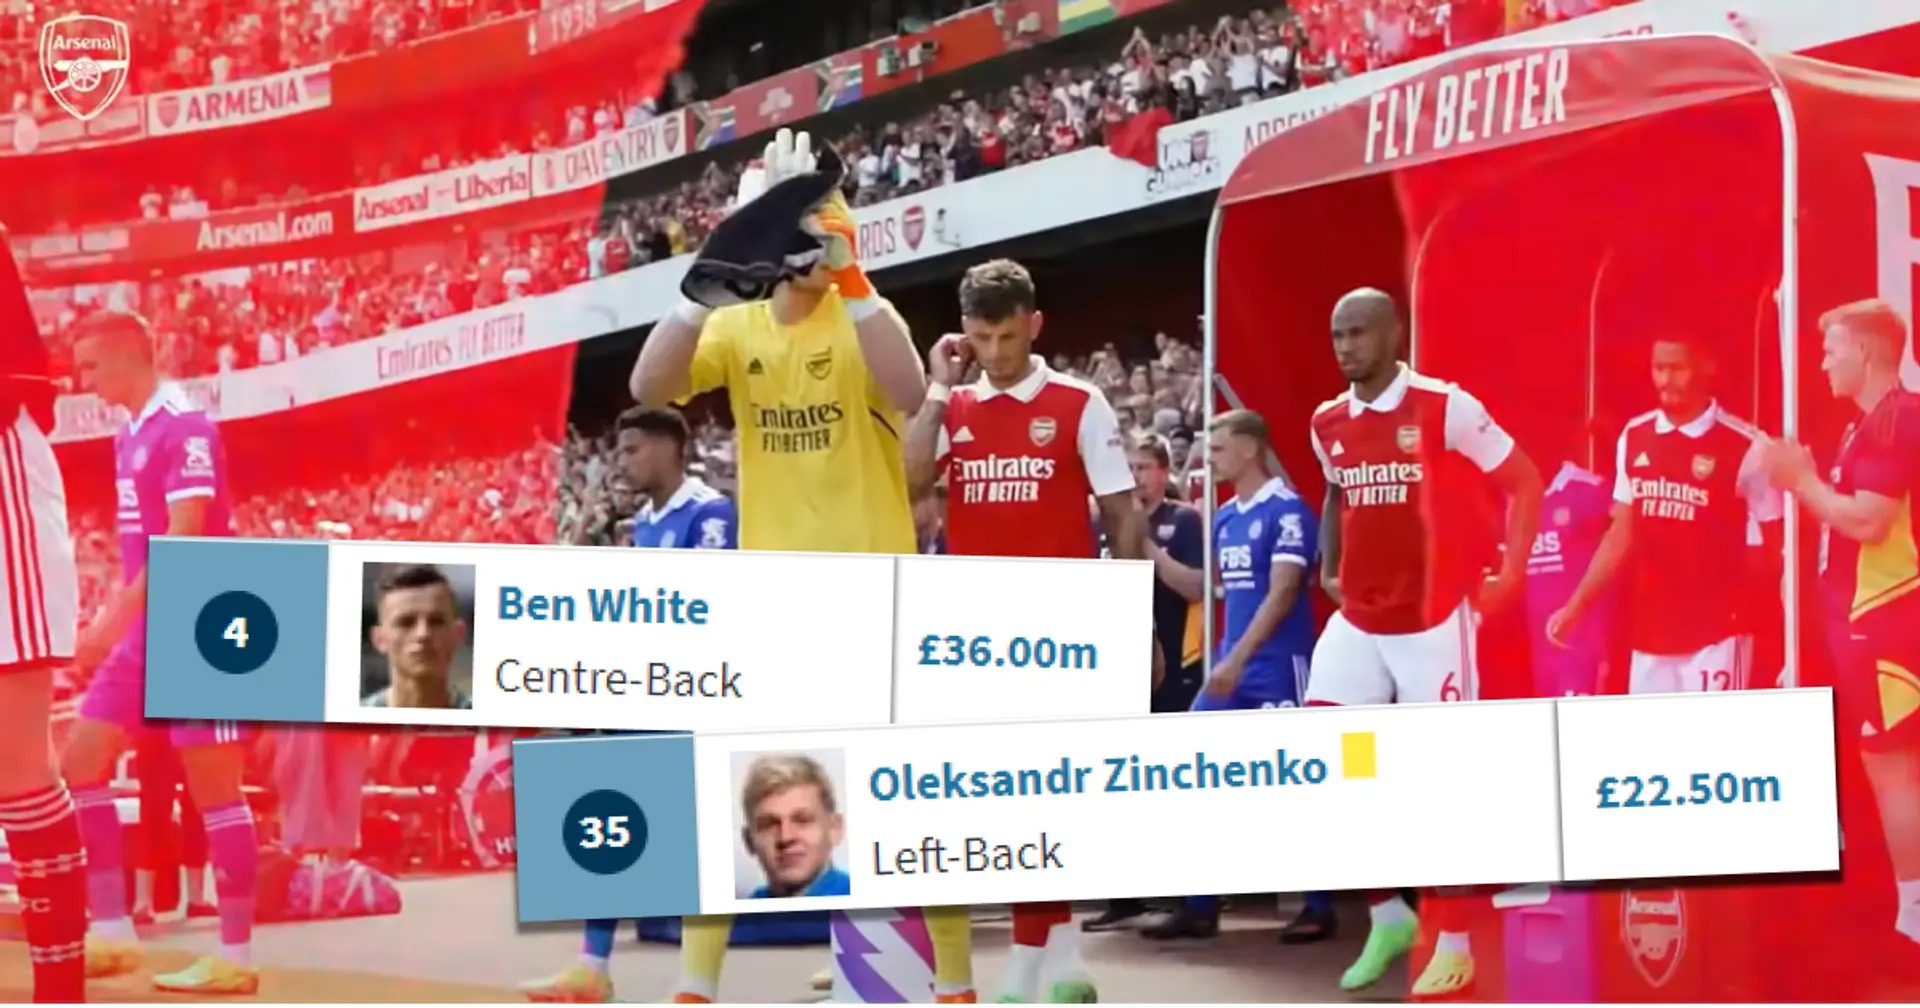 8 Arsenal players with market value estimated at more than £30 million – Zinchenko not there